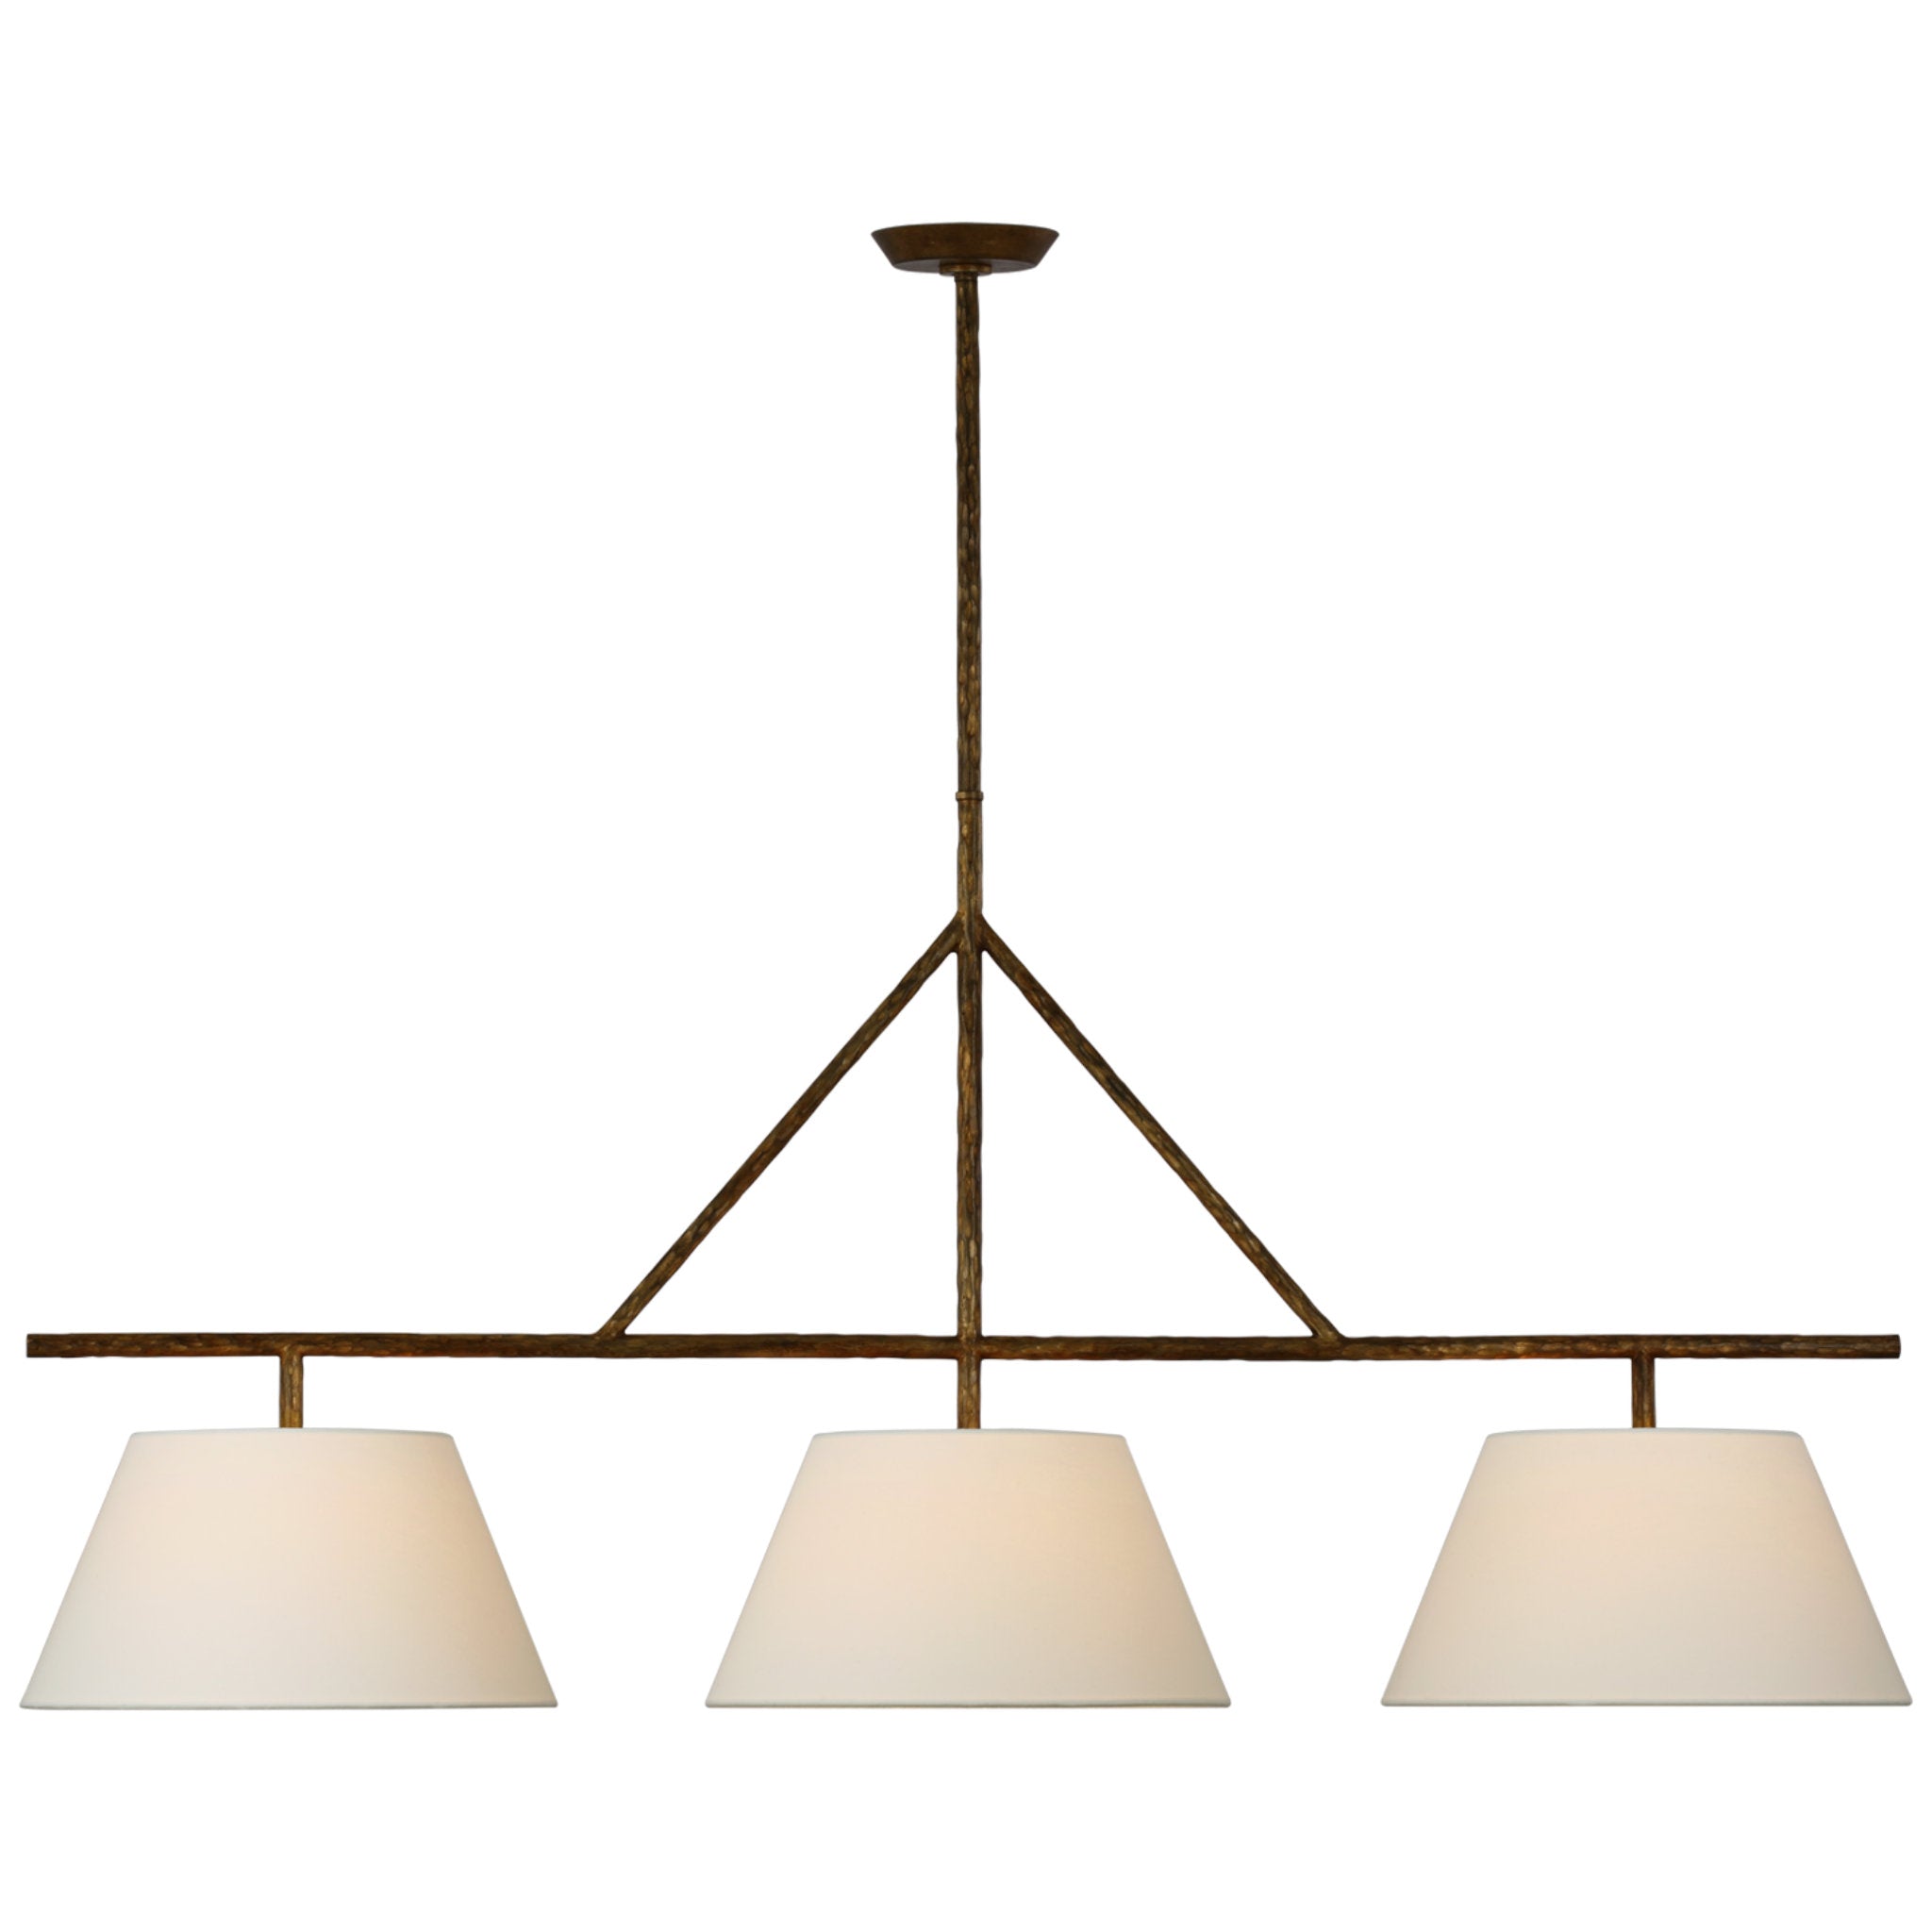 Suzanne Kasler Collette Large Linear Pendant in Gilded Iron with Linen Shade